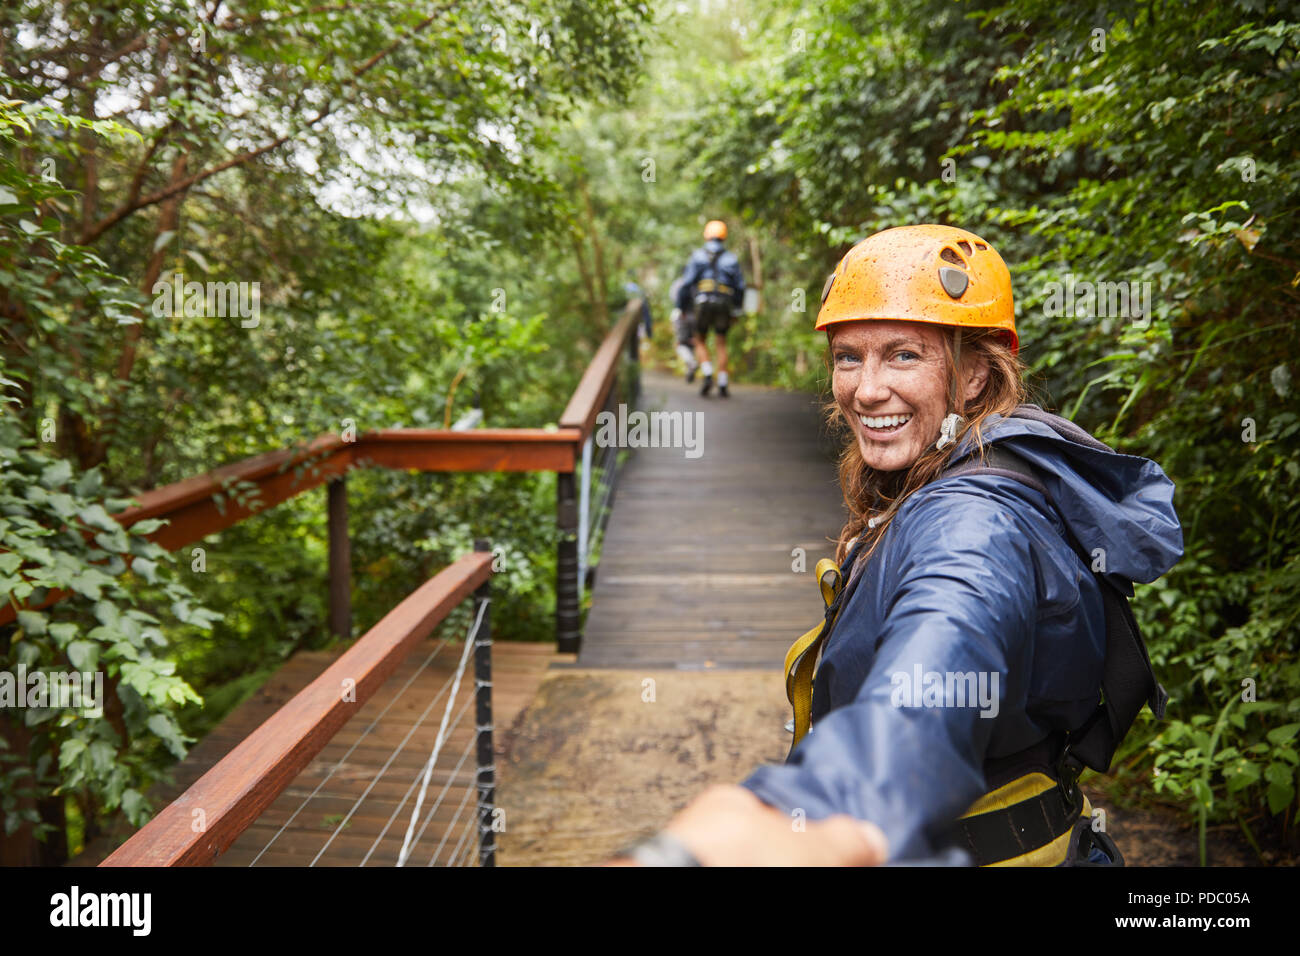 Portrait smiling woman zip lining in woods Stock Photo